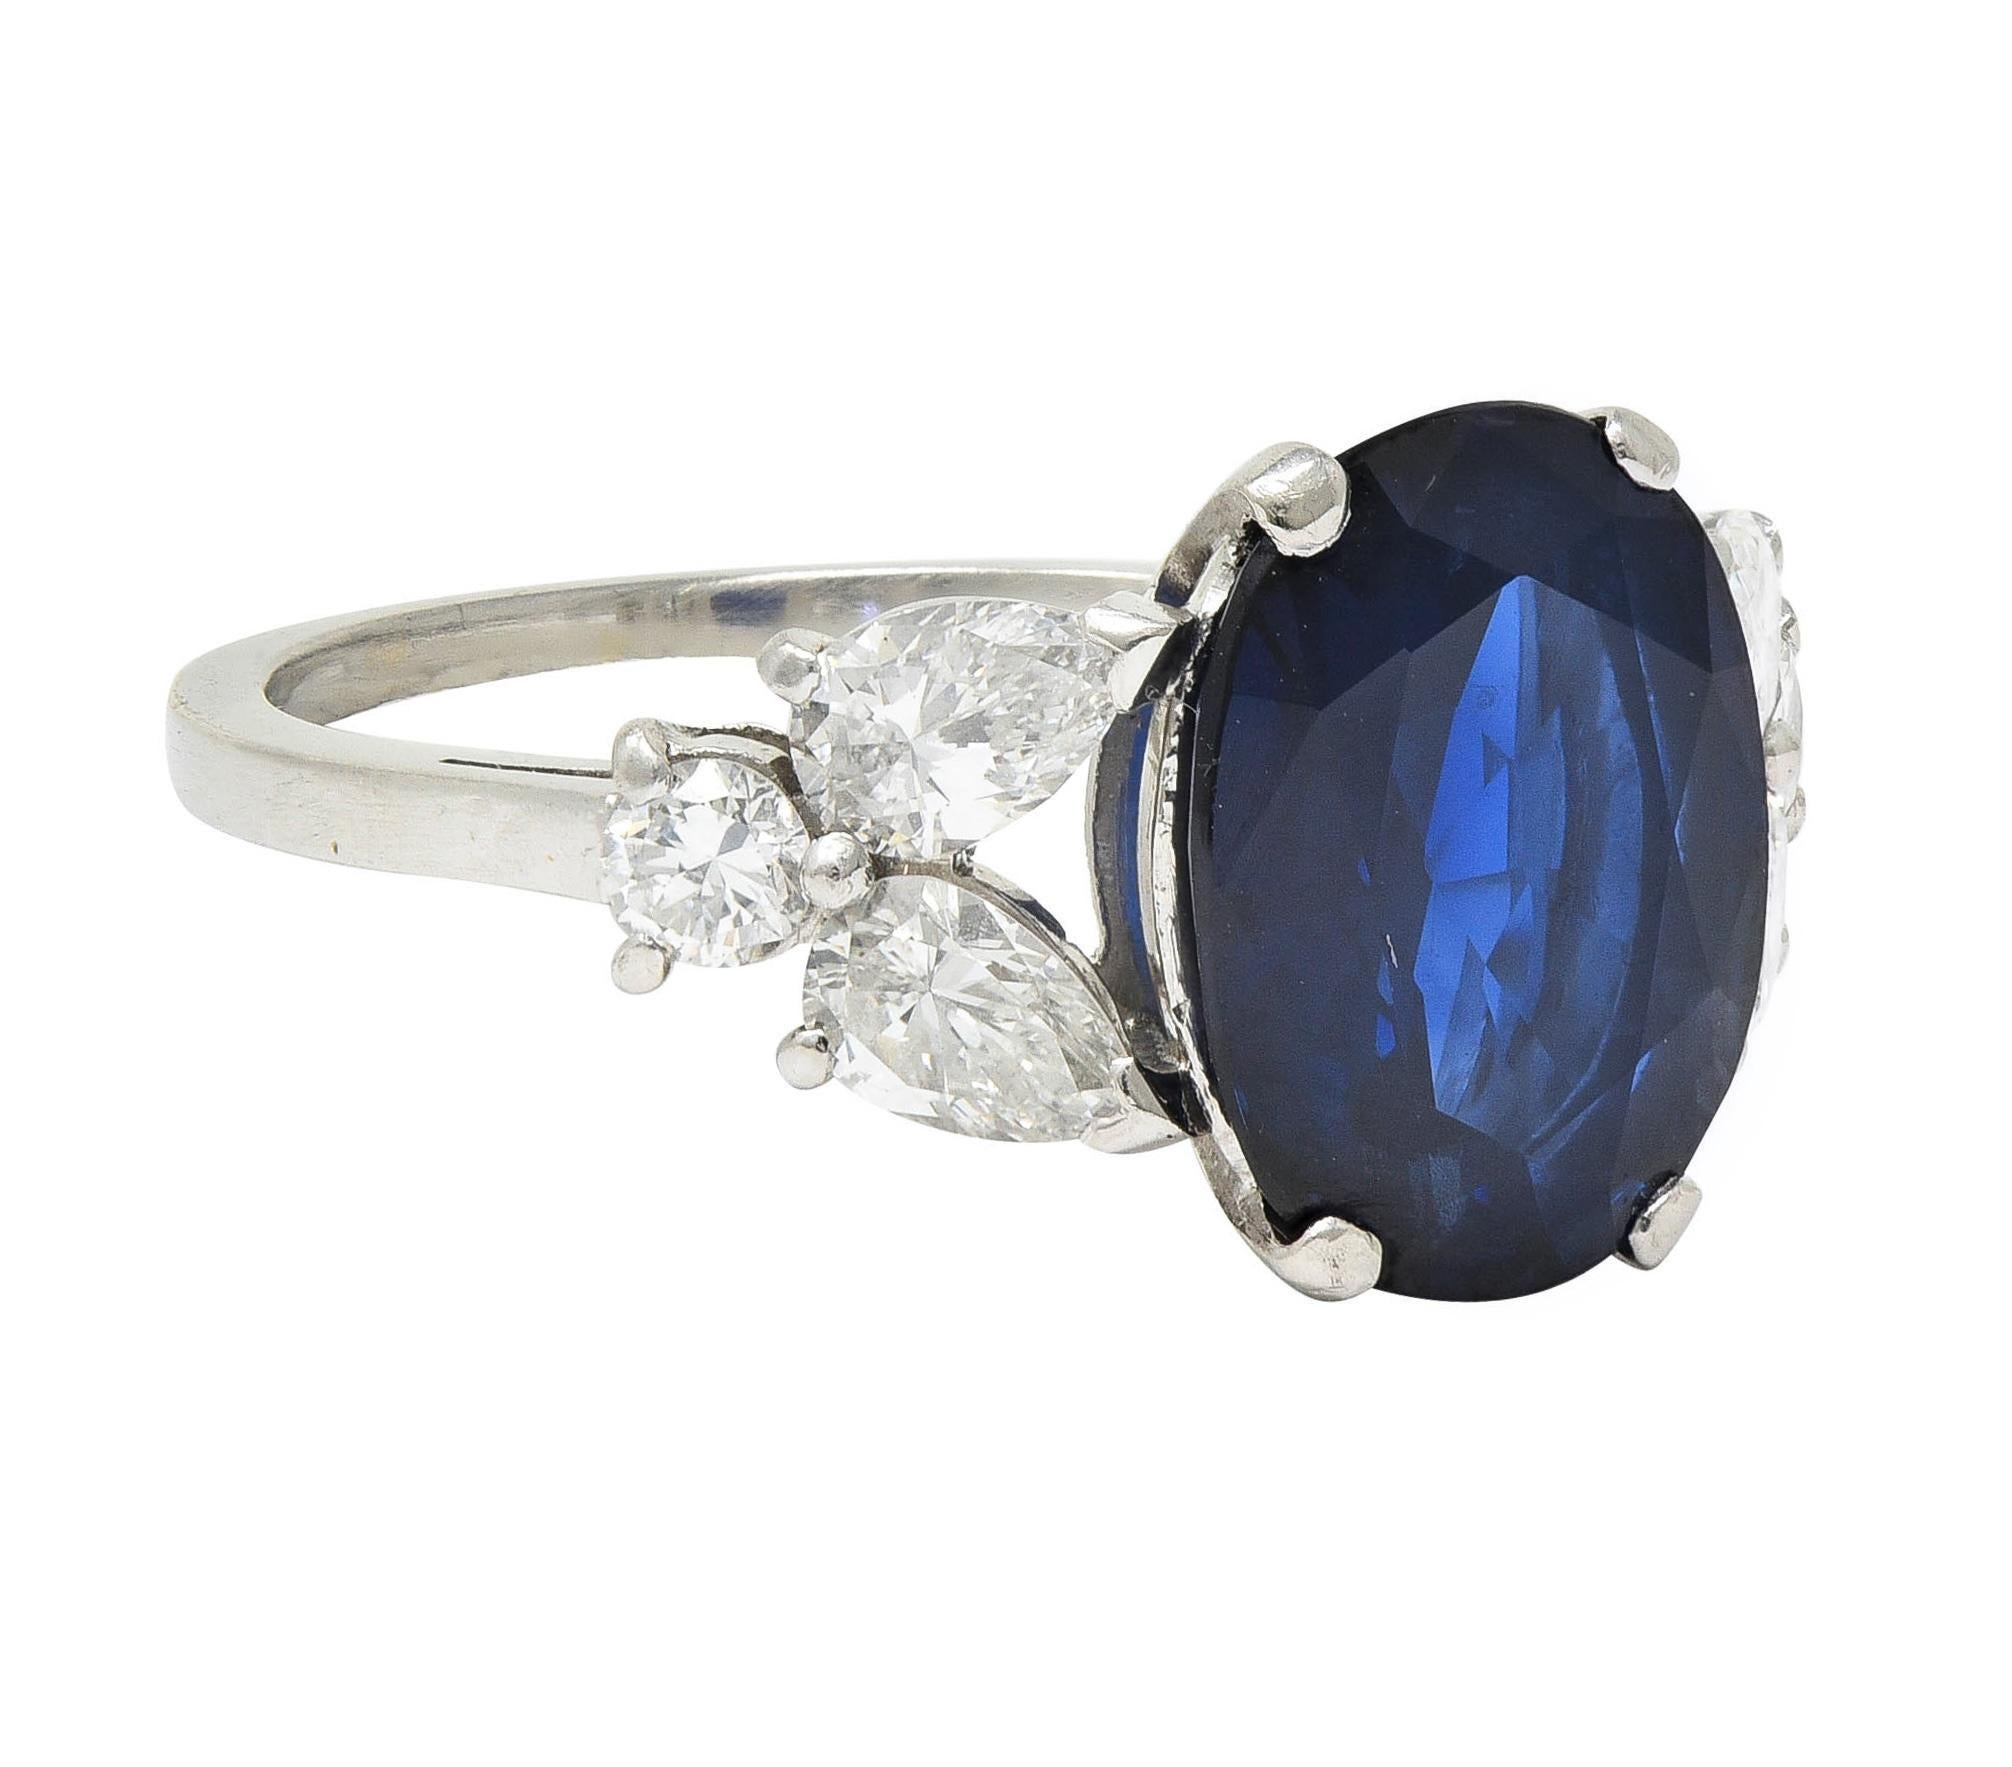 Centering an oval cut sapphire weighing approximately 4.20 carats - transparent dark blue in color
Prong set in basket and flanked by cathedral shoulders prong set with clustered diamonds
Pear and round brilliant cut - weighing approximately 1.40